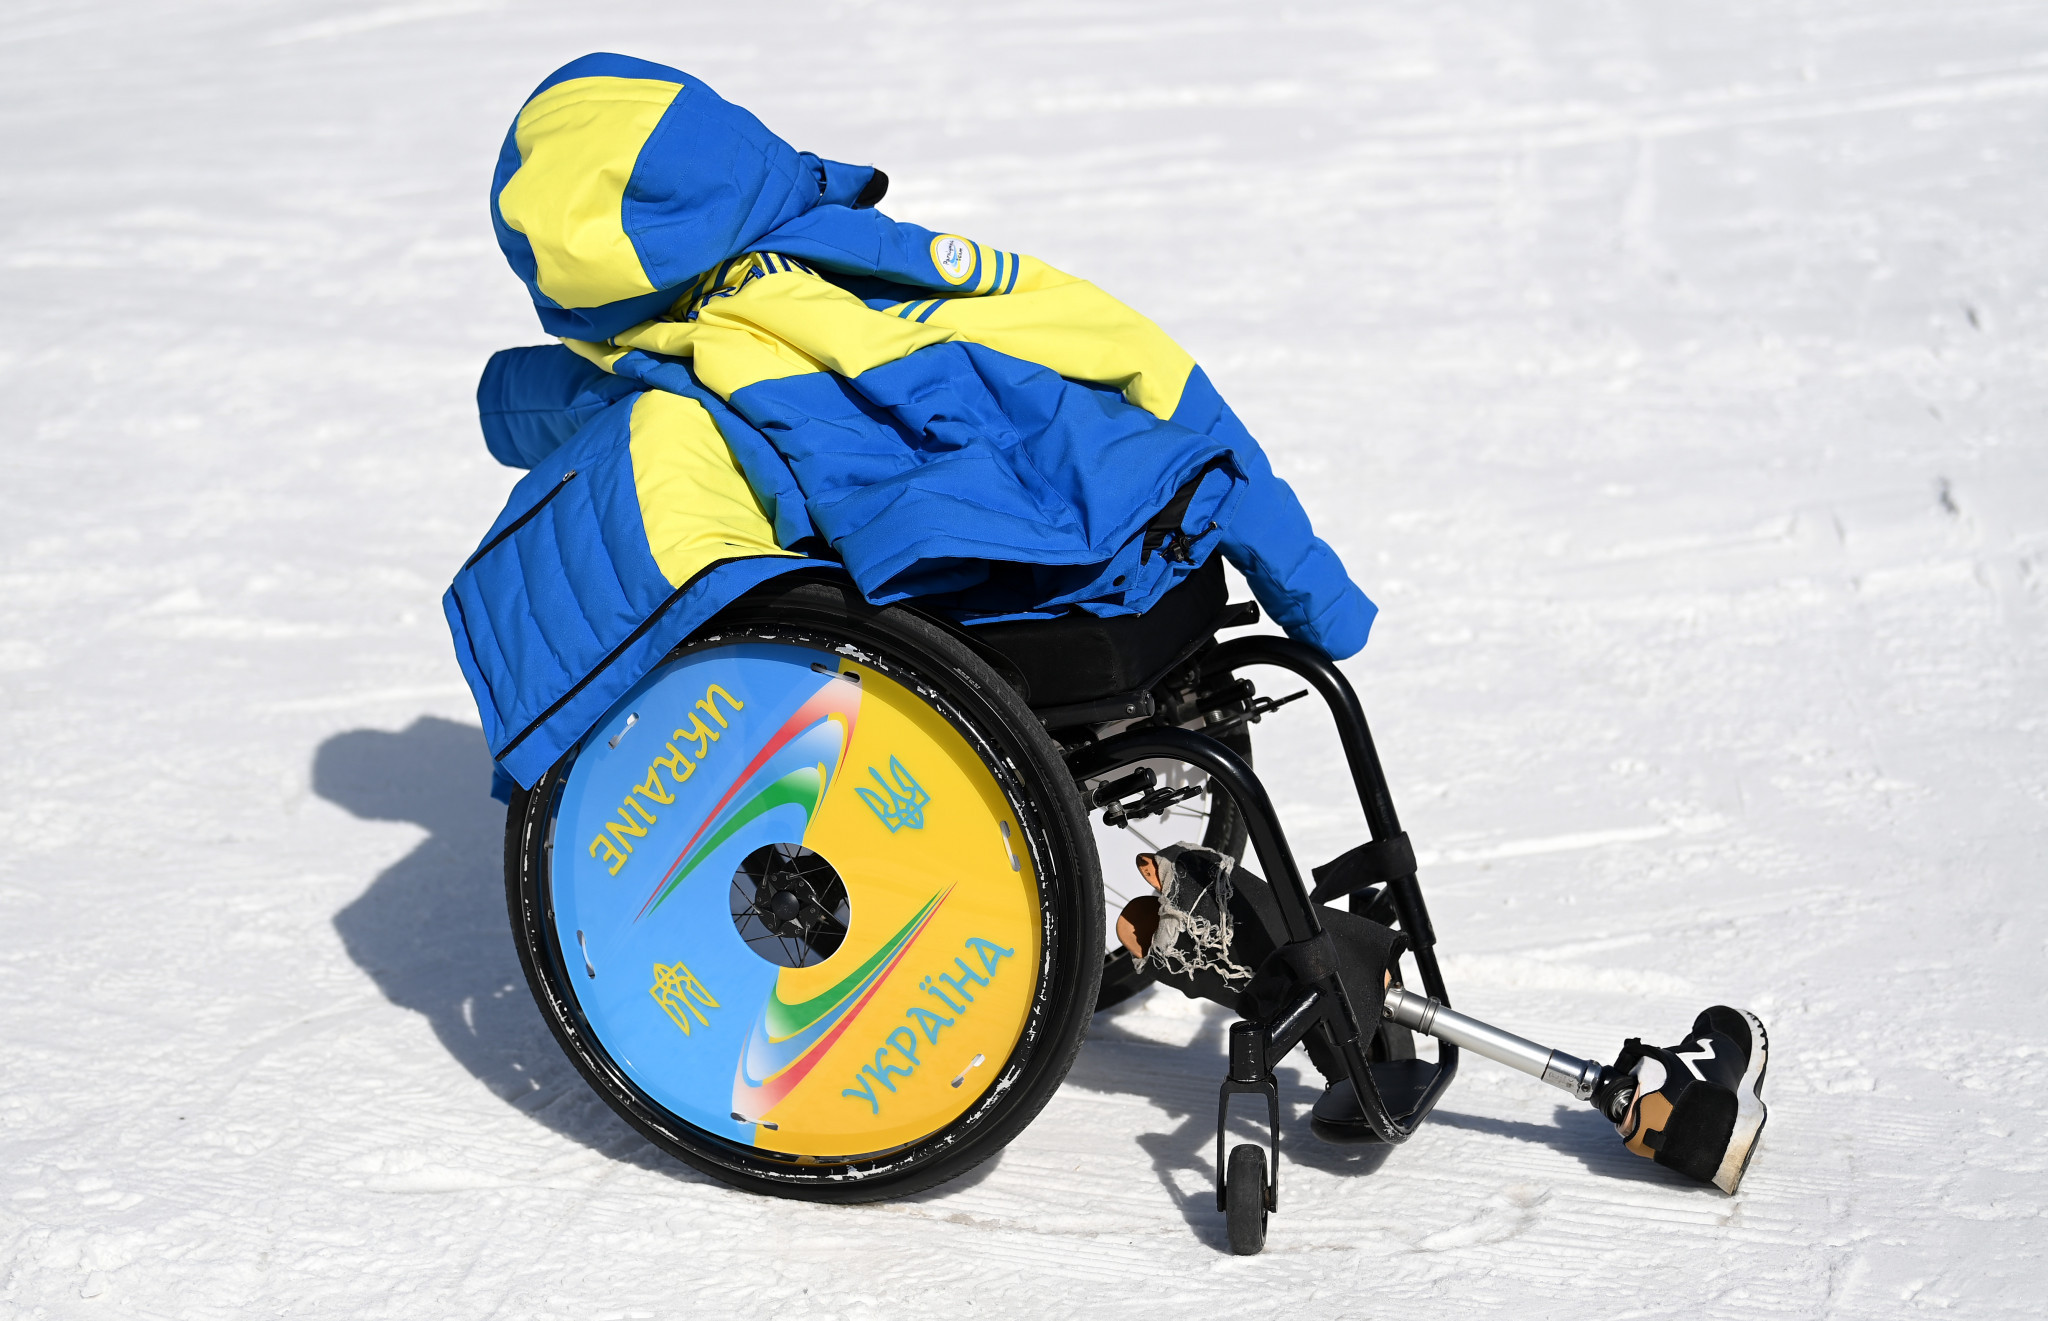 International Paralympic Committee vying for change with accessibility overhaul in Beijing